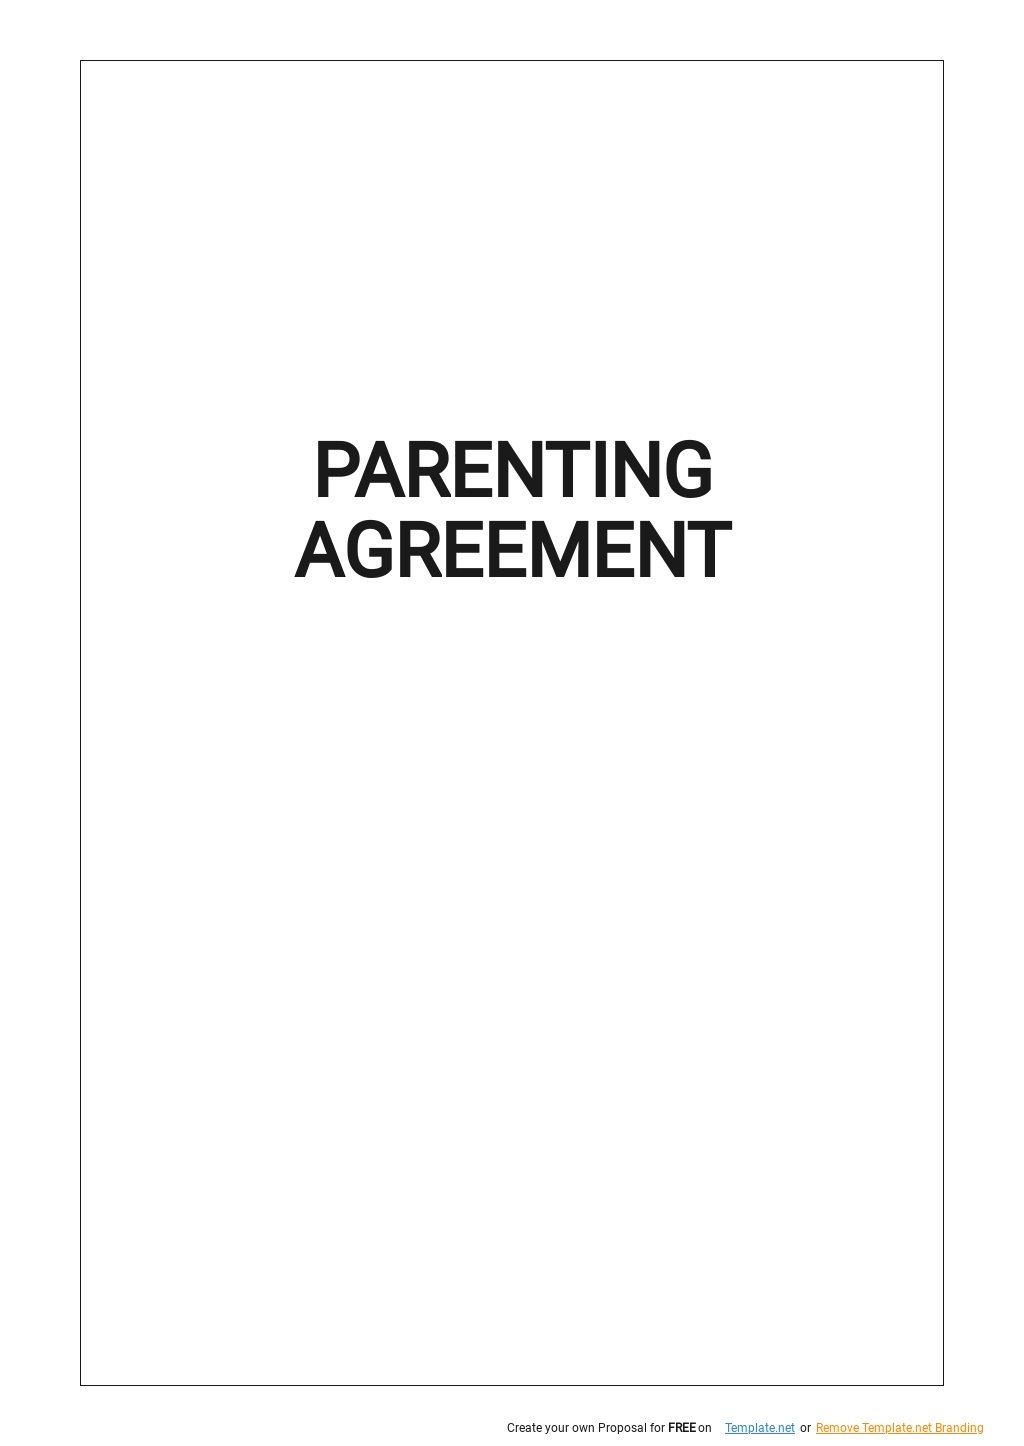 Player Agreement Template